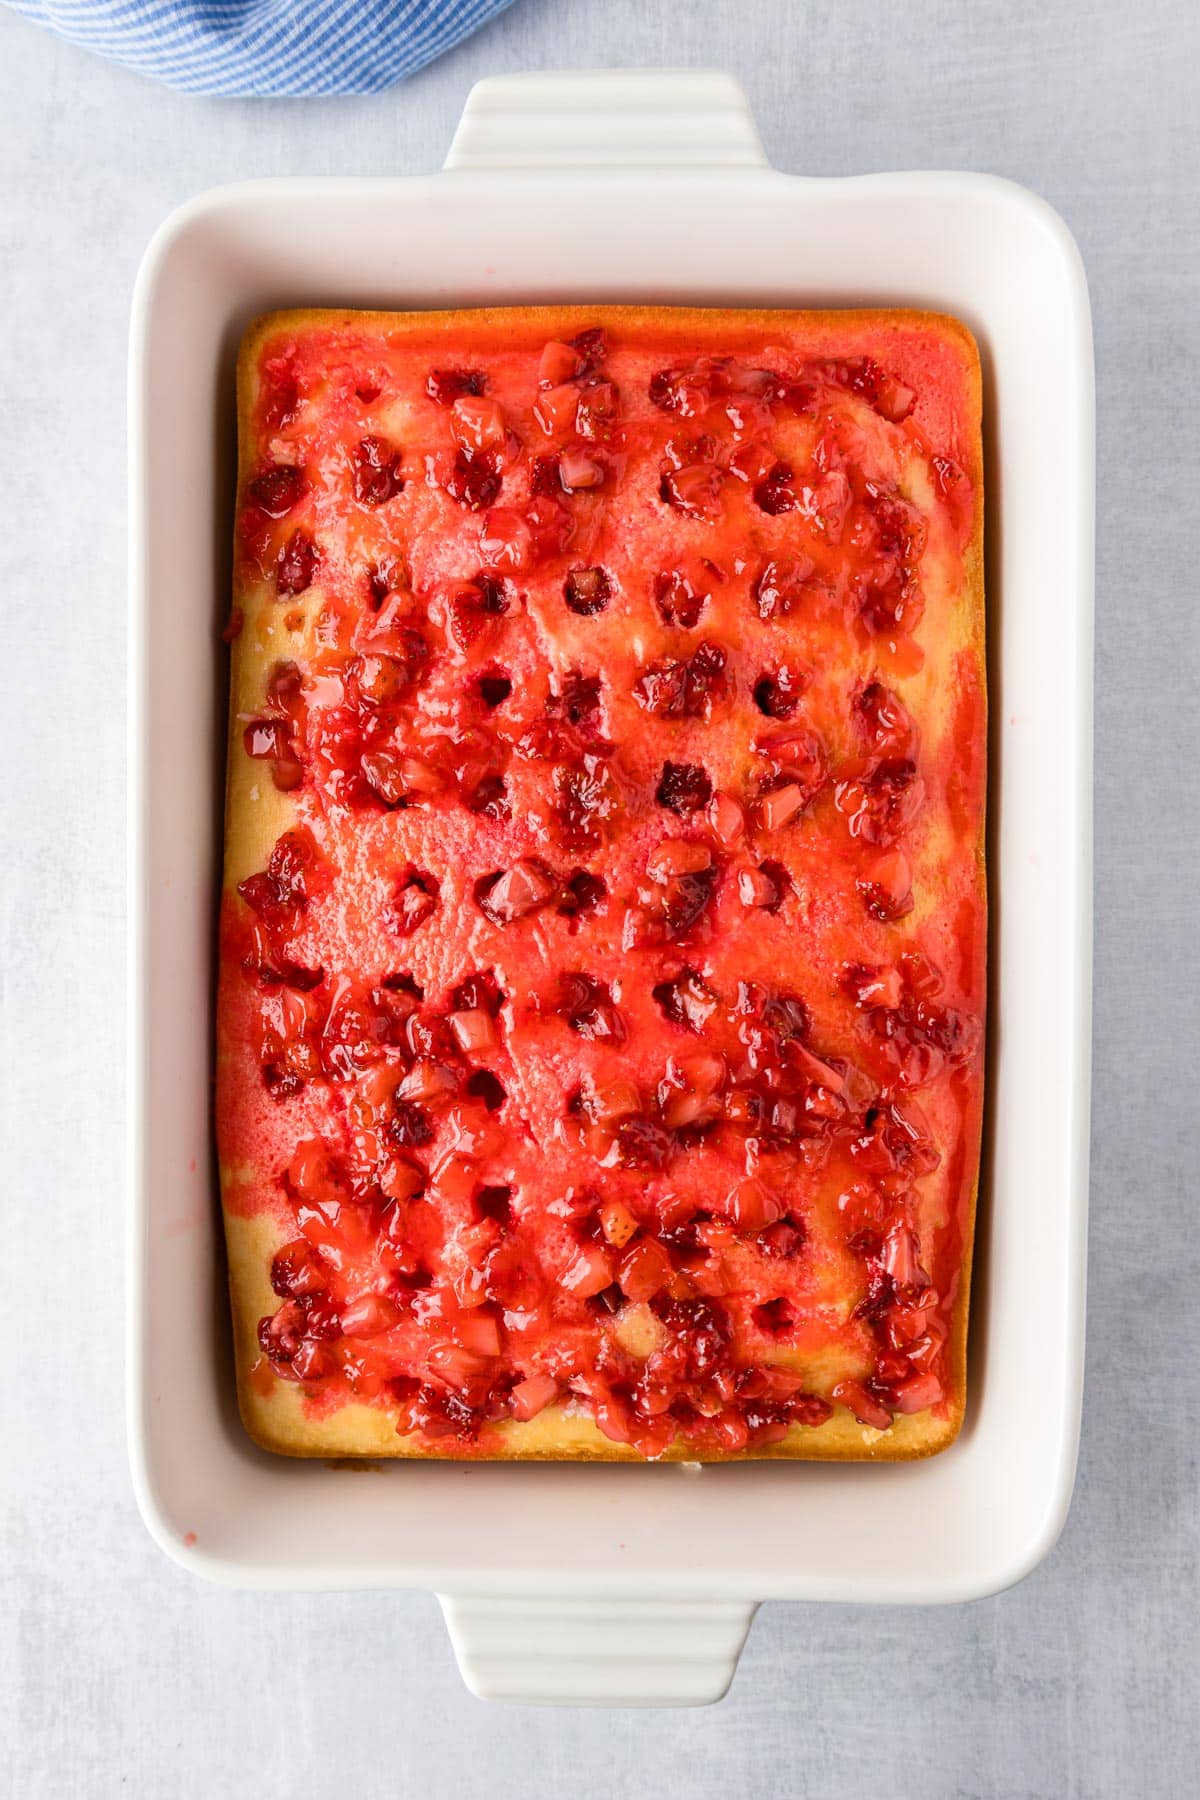 Baking dish with a rectangular cake with evenly space holes in the cake and a real pieces of cooked strawberries over the cake.